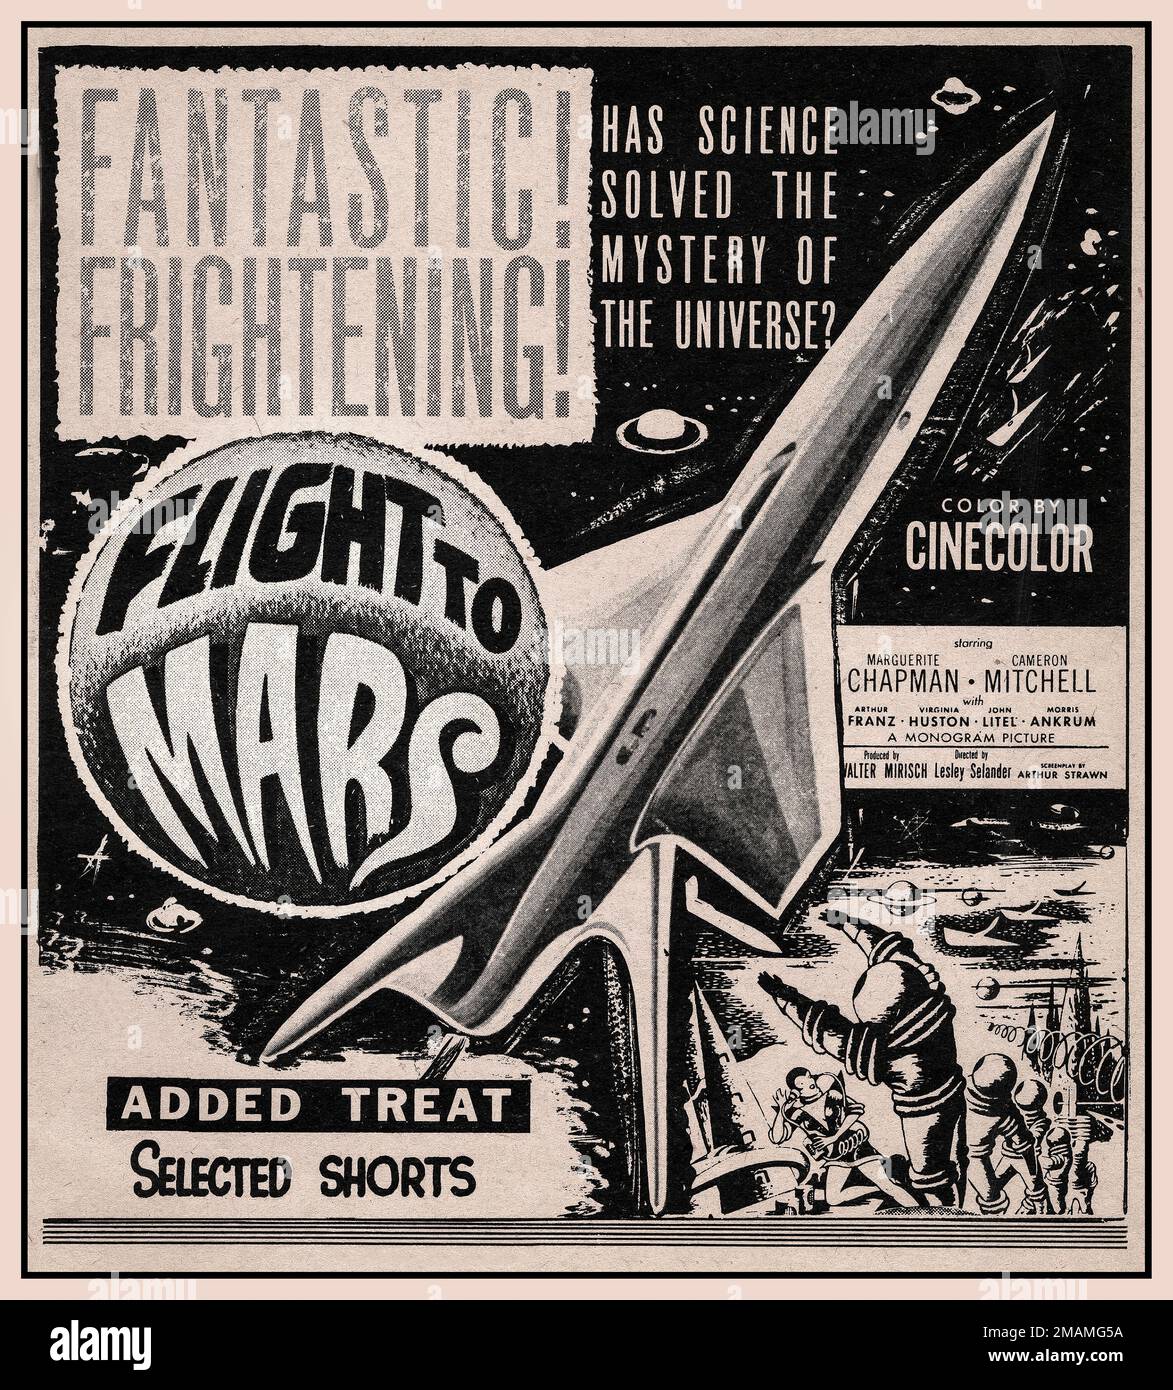 Vintage Movie 'Flight To Mars' Classification Sci Fi poster for the film Flight to Mars (1951), Starring Arthur Franz and Marguerite Chapman from the Alberta Ministry of Labour  USA Flight to Mars is a 1951 American Cinecolor science fiction film drama, produced by Walter Mirisch for Monogram Pictures, directed by Lesley Selander, starring Marguerite Chapman, Cameron Mitchell, and Arthur Franz. Stock Photo